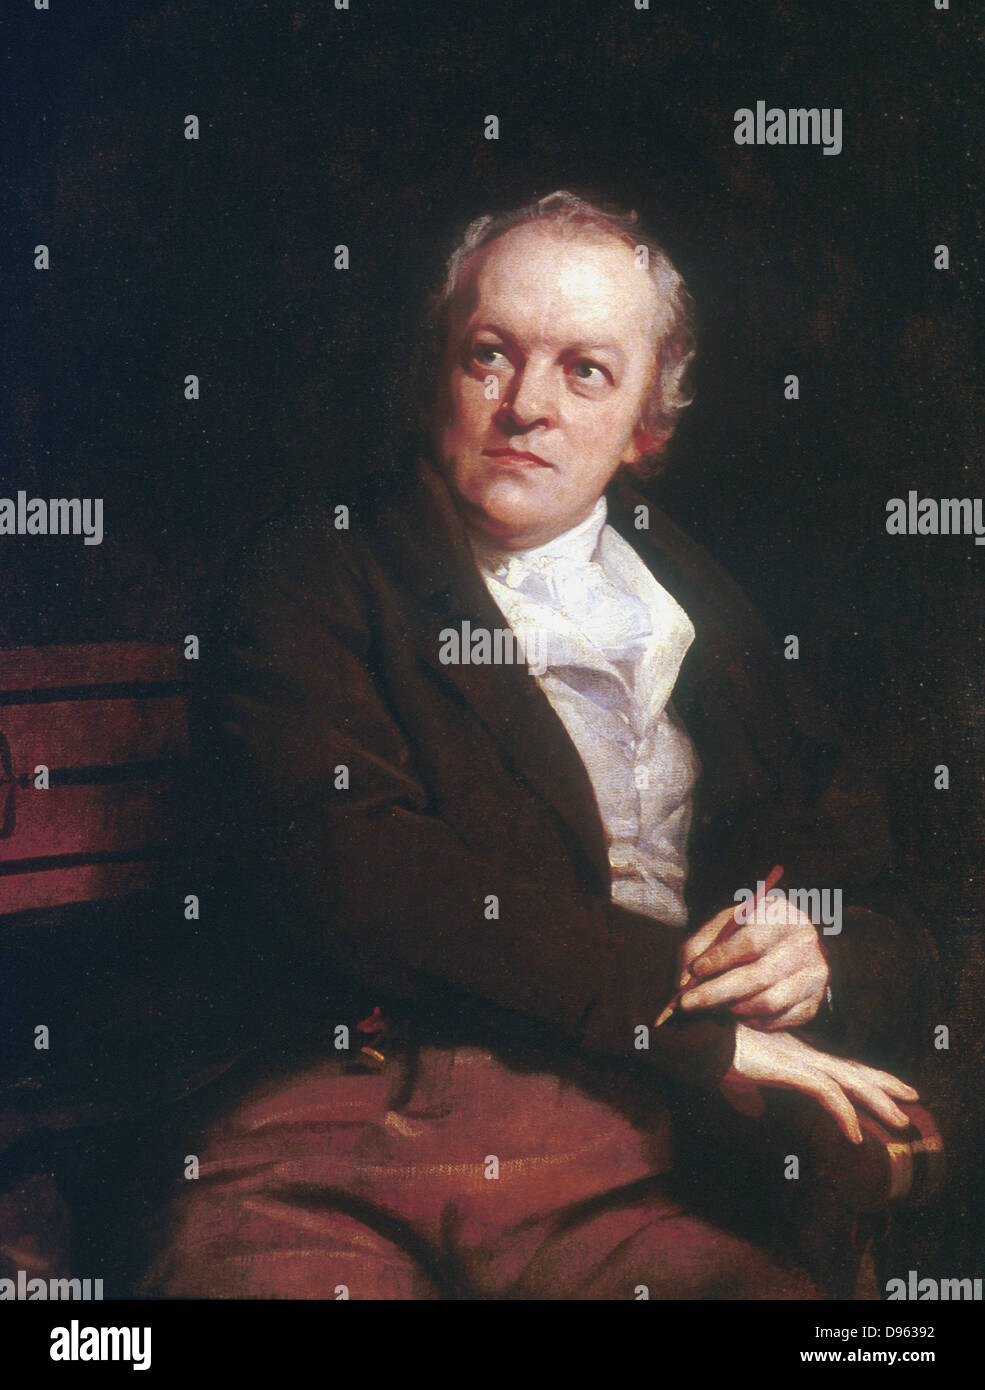 William BLAKE (1757-1827)  English mystic, poet, artist and engraver. 1807 portrait by Thomas Phillips. National Portrait Gallery, London Stock Photo